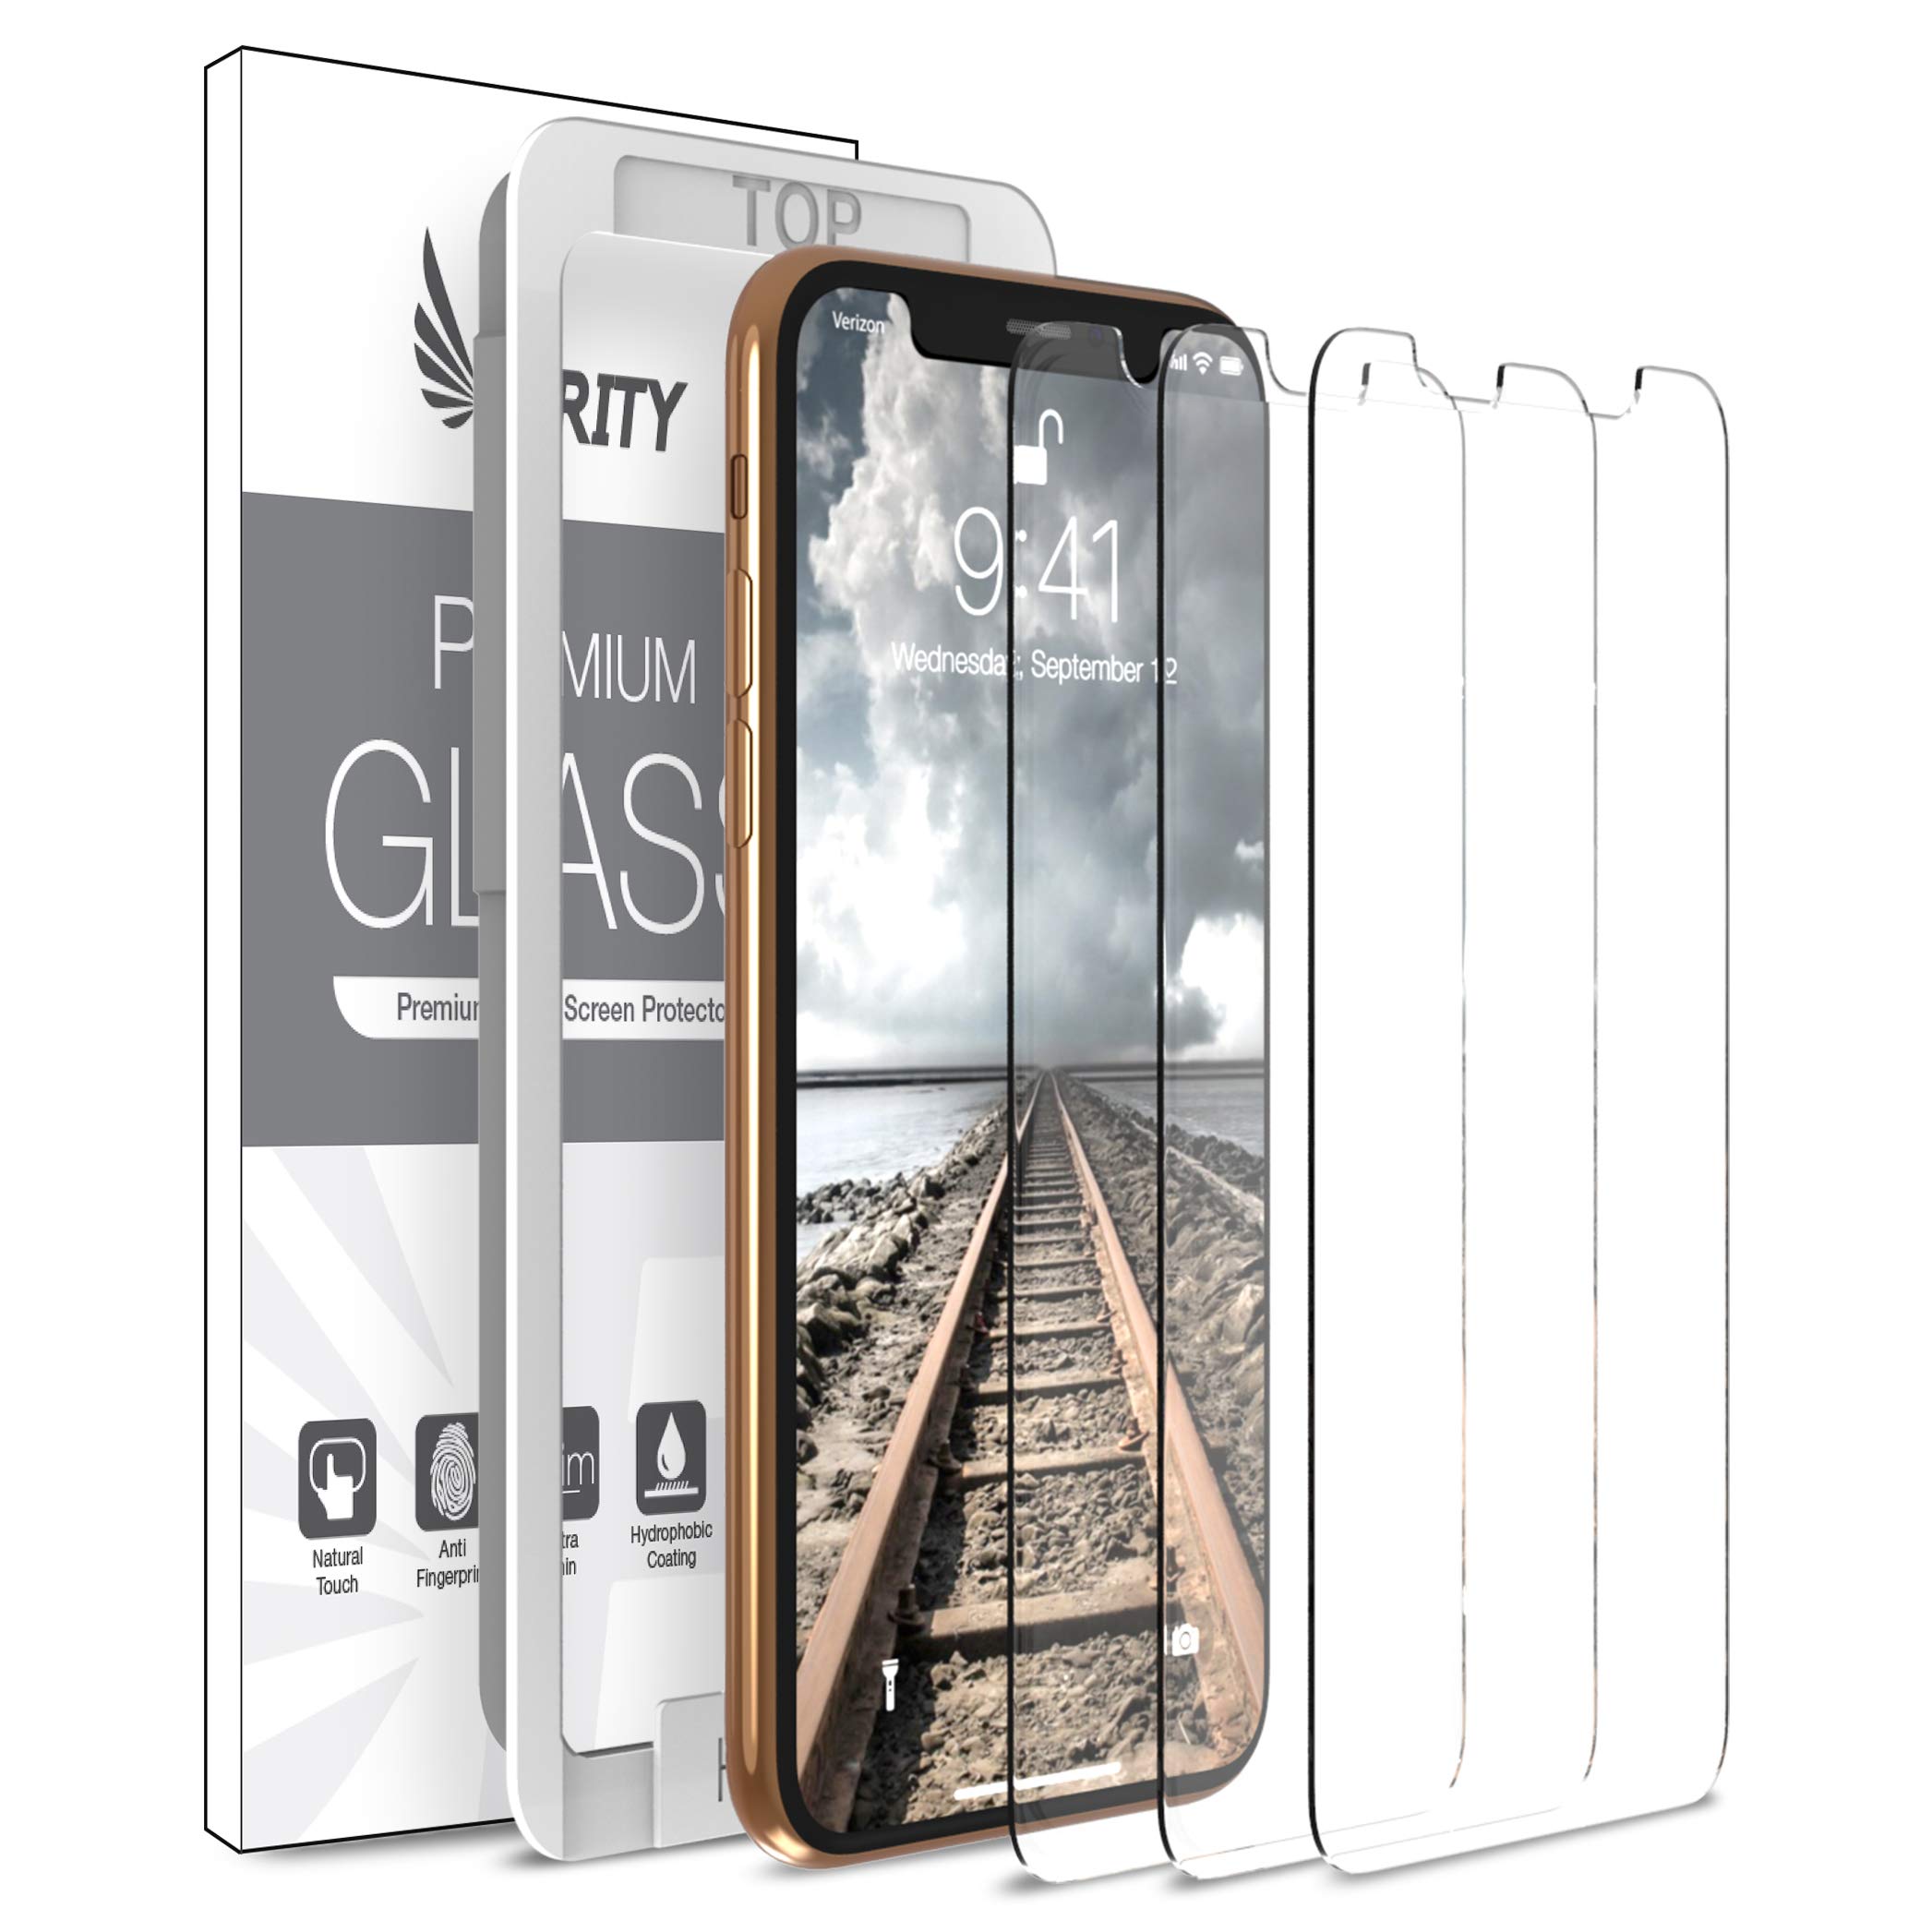 Purity Screen Protector for Apple iPhone 11 Pro/iPhone Xs/iPhone X - 3 Pack (w/Installation Frame) Tempered Glass Screen Protector Compatible iPhone XS/X/11Pro (3 Pack) [Fit with Most Cases]